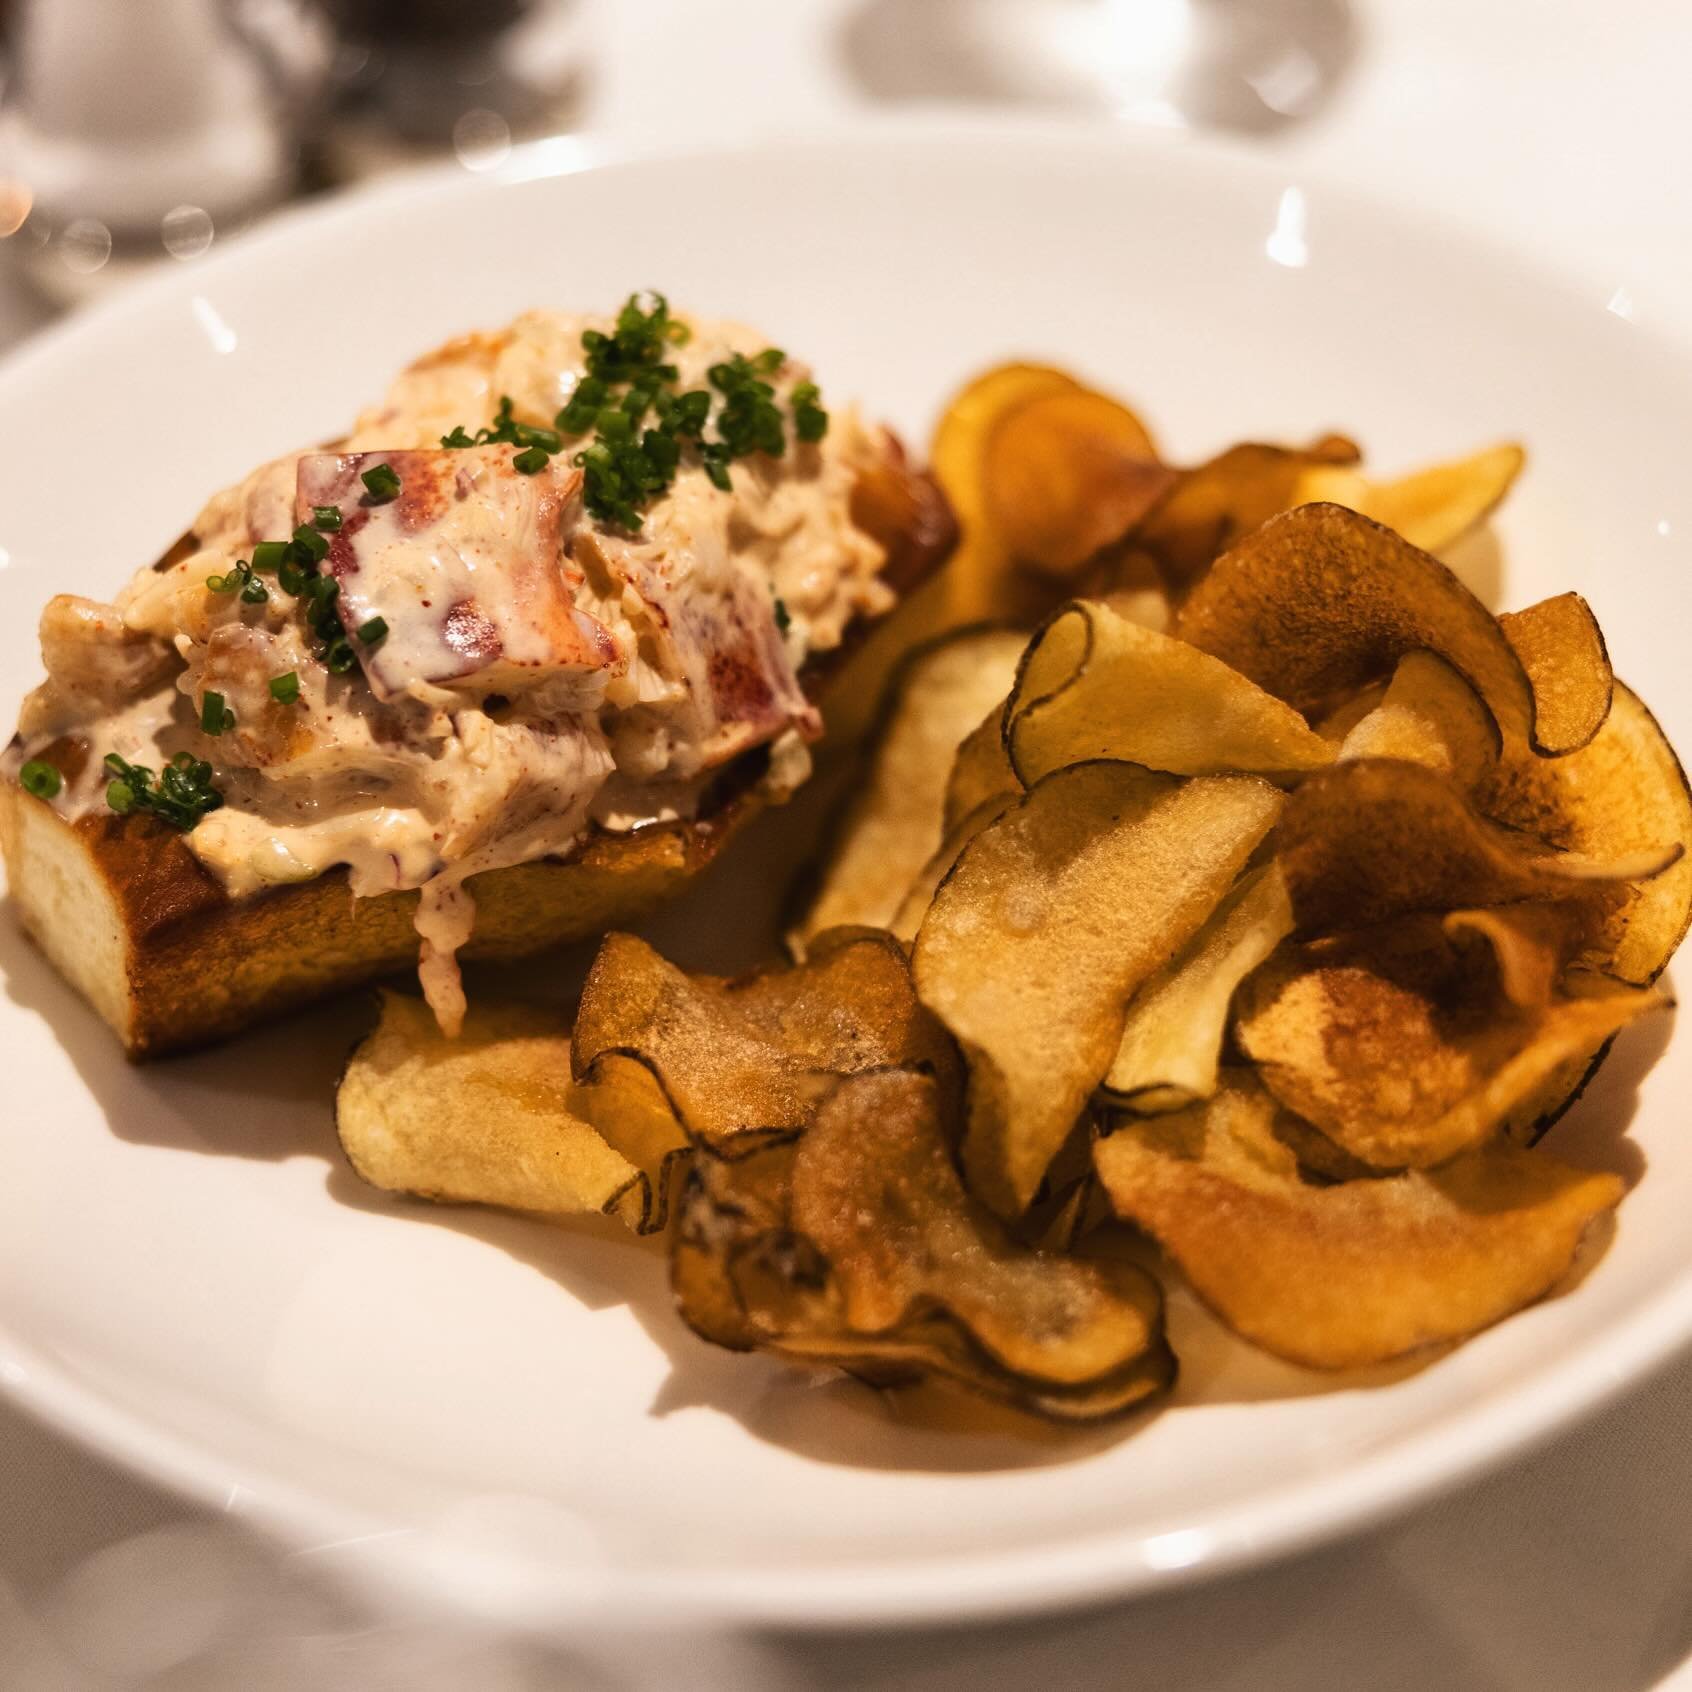 Join us after the 🏃&zwj;♀️💨 

We&rsquo;re open from 1 to 9:30 pm and serving your favorite marathon specials like: New England Lobster Rolls with lemon remoulade, celery, and old bay potato chips

#boston #bostonfoodies #bostonfood #bostoneats #bos